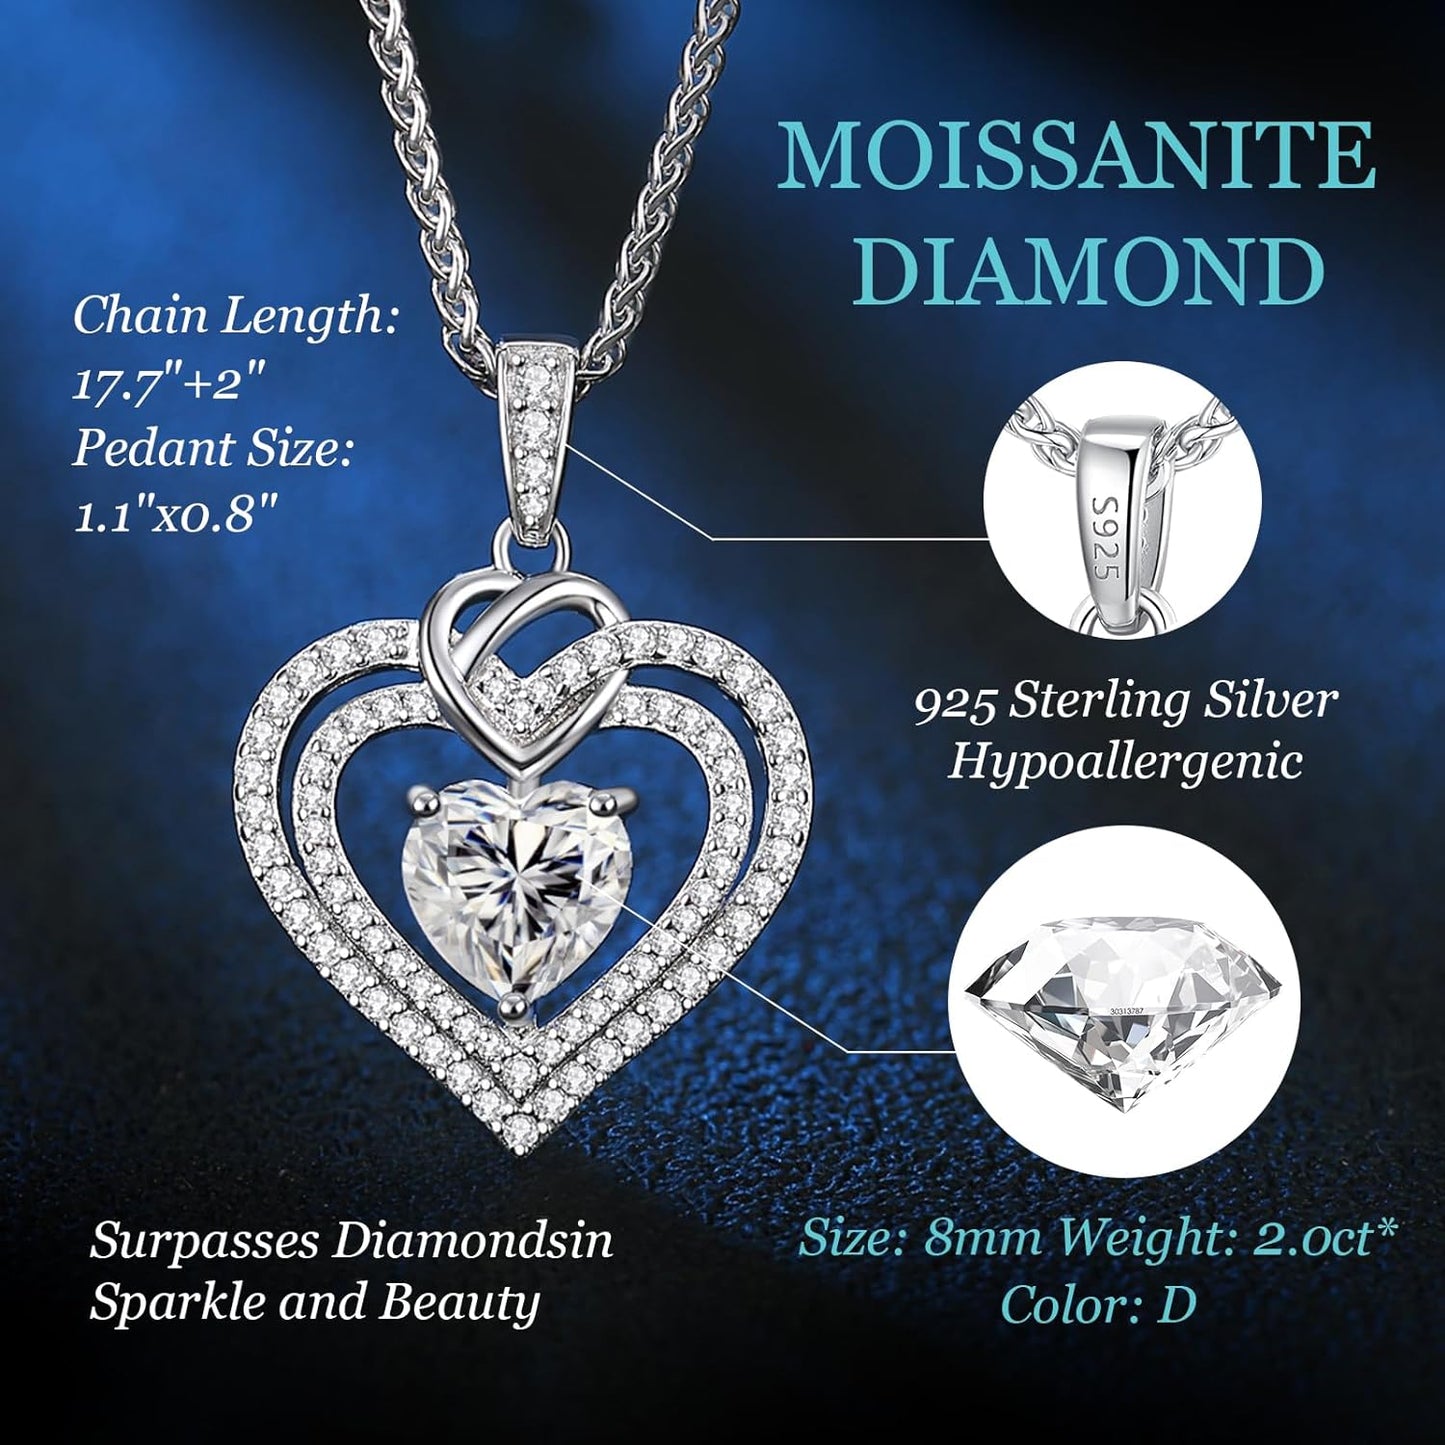 OOBEE Moissanite Diamond Necklace Valentine's Gifts for Women, 925 Sterling Silver Fine Jewelry, Heart Pendant Necklace Birthday Anniversary Christmas Gift for Women Wife Mom Girlfriend Lady (2.0 Carats Heart Moissanite Diamond)